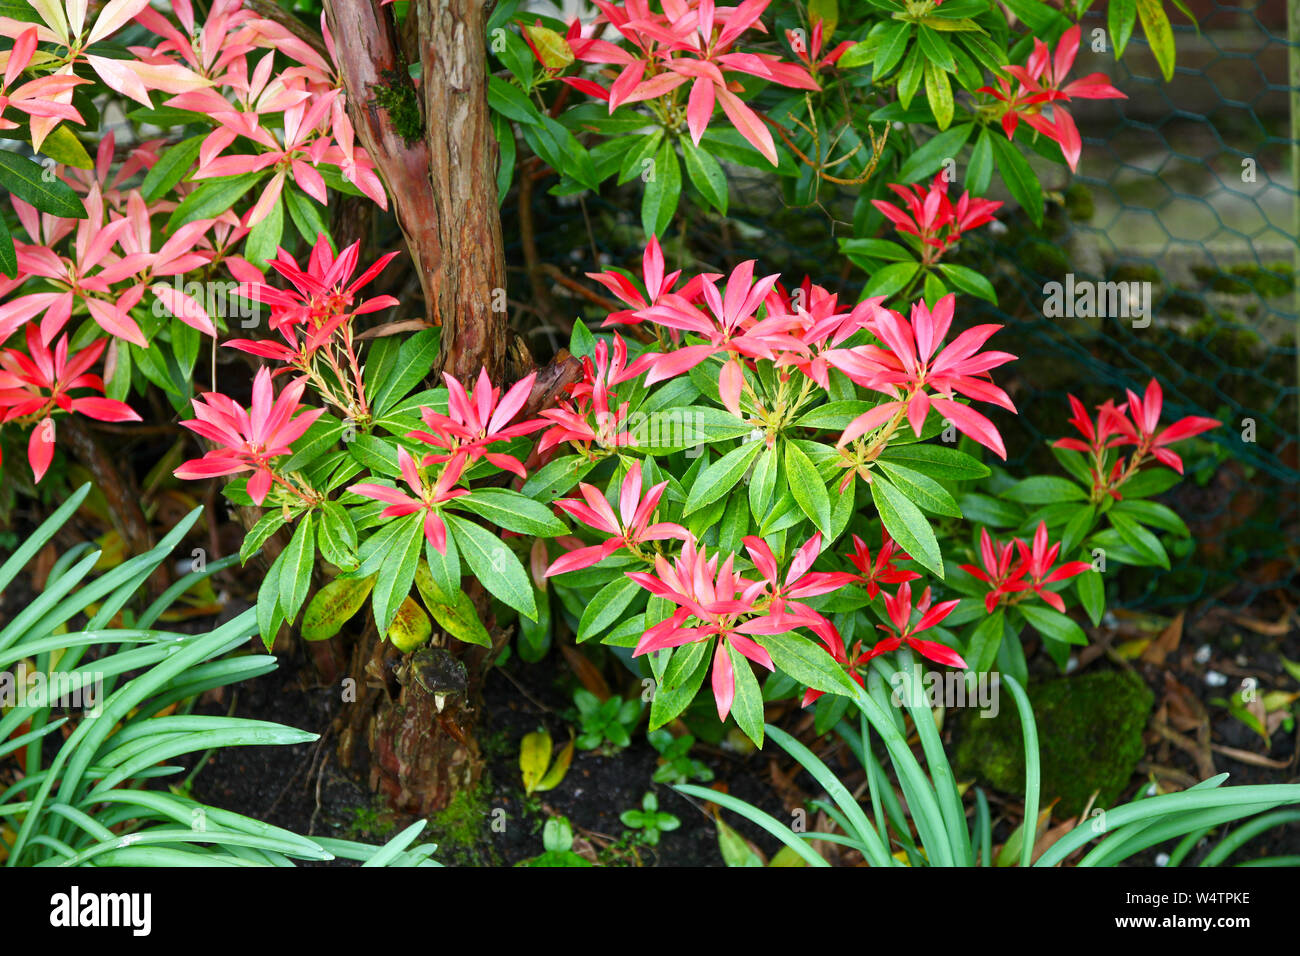 The white flower racemes and red new growth shoots of  young leaves of Pieris japonica 'Forest Flame' flowering shrub Stock Photo